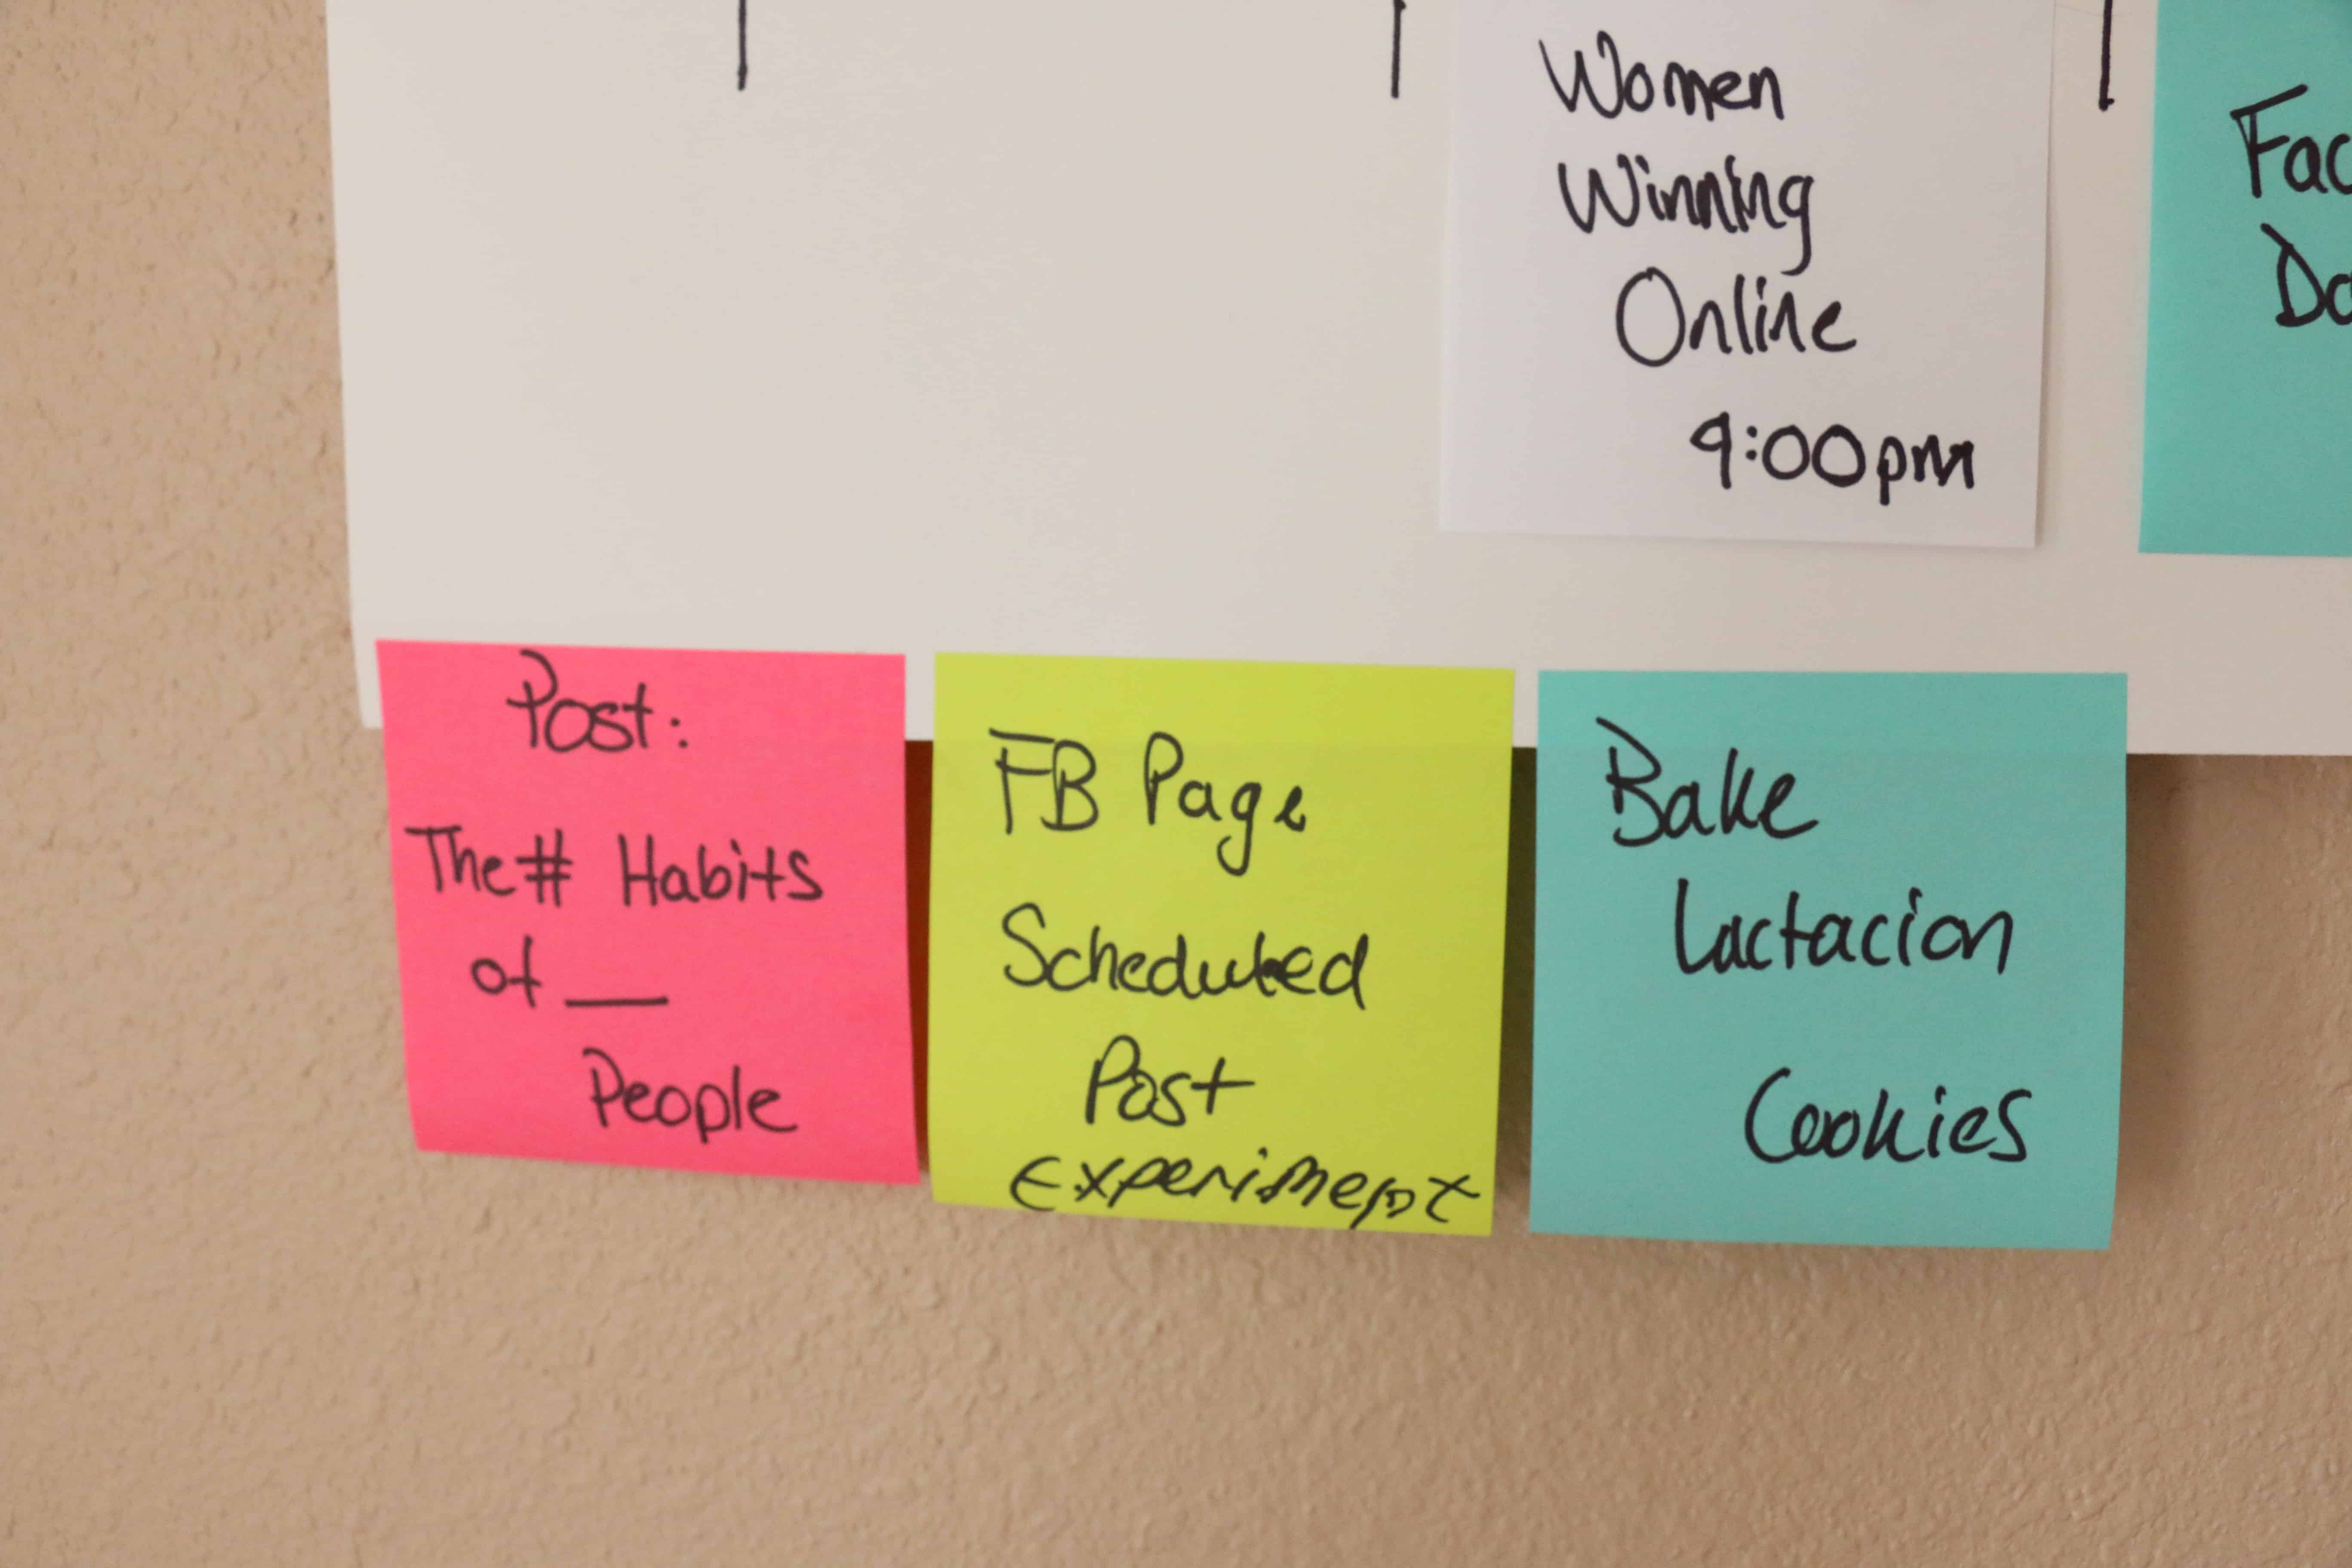 Super Simple Weekly Schedule to Get Stuff Done Post-it Notes Organize and Schedule my Life with Post it notes - Super Simple Hack! 8